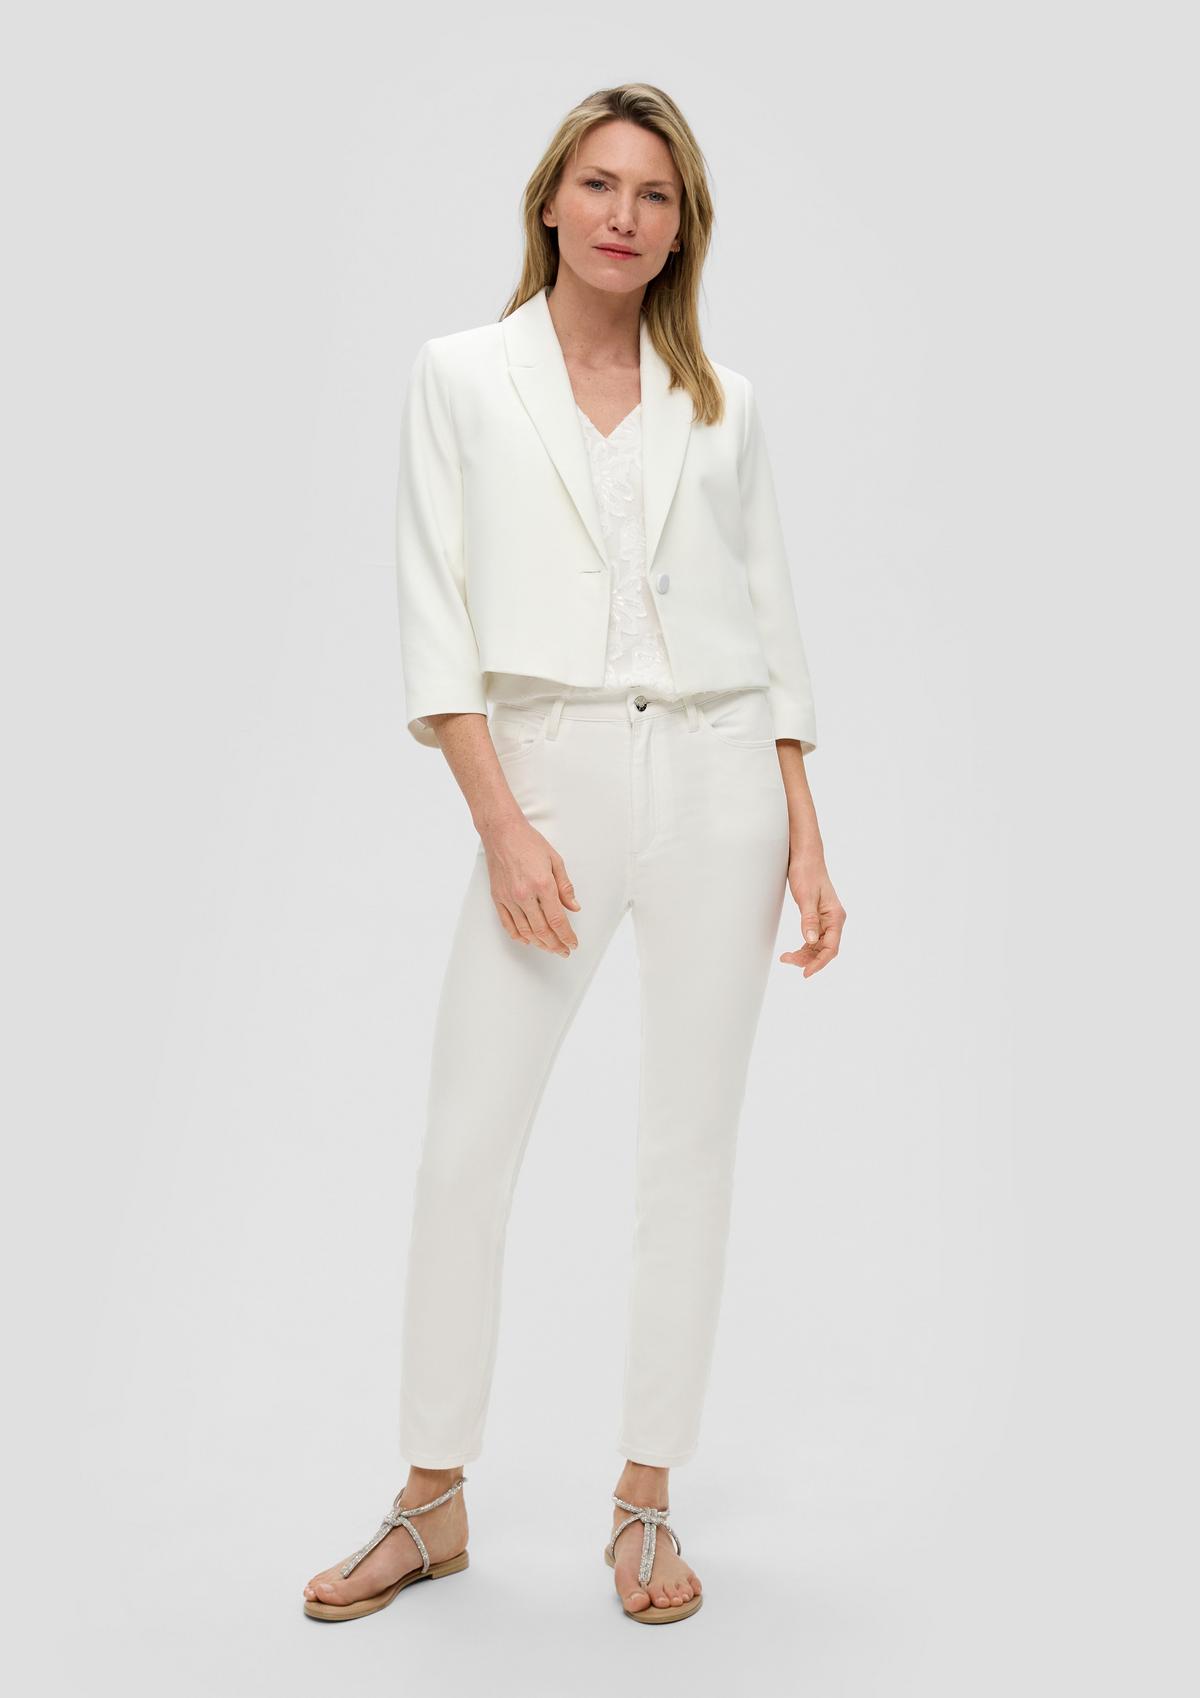 s.Oliver Betsy cropped jeans / slim fit / high rise / slim leg